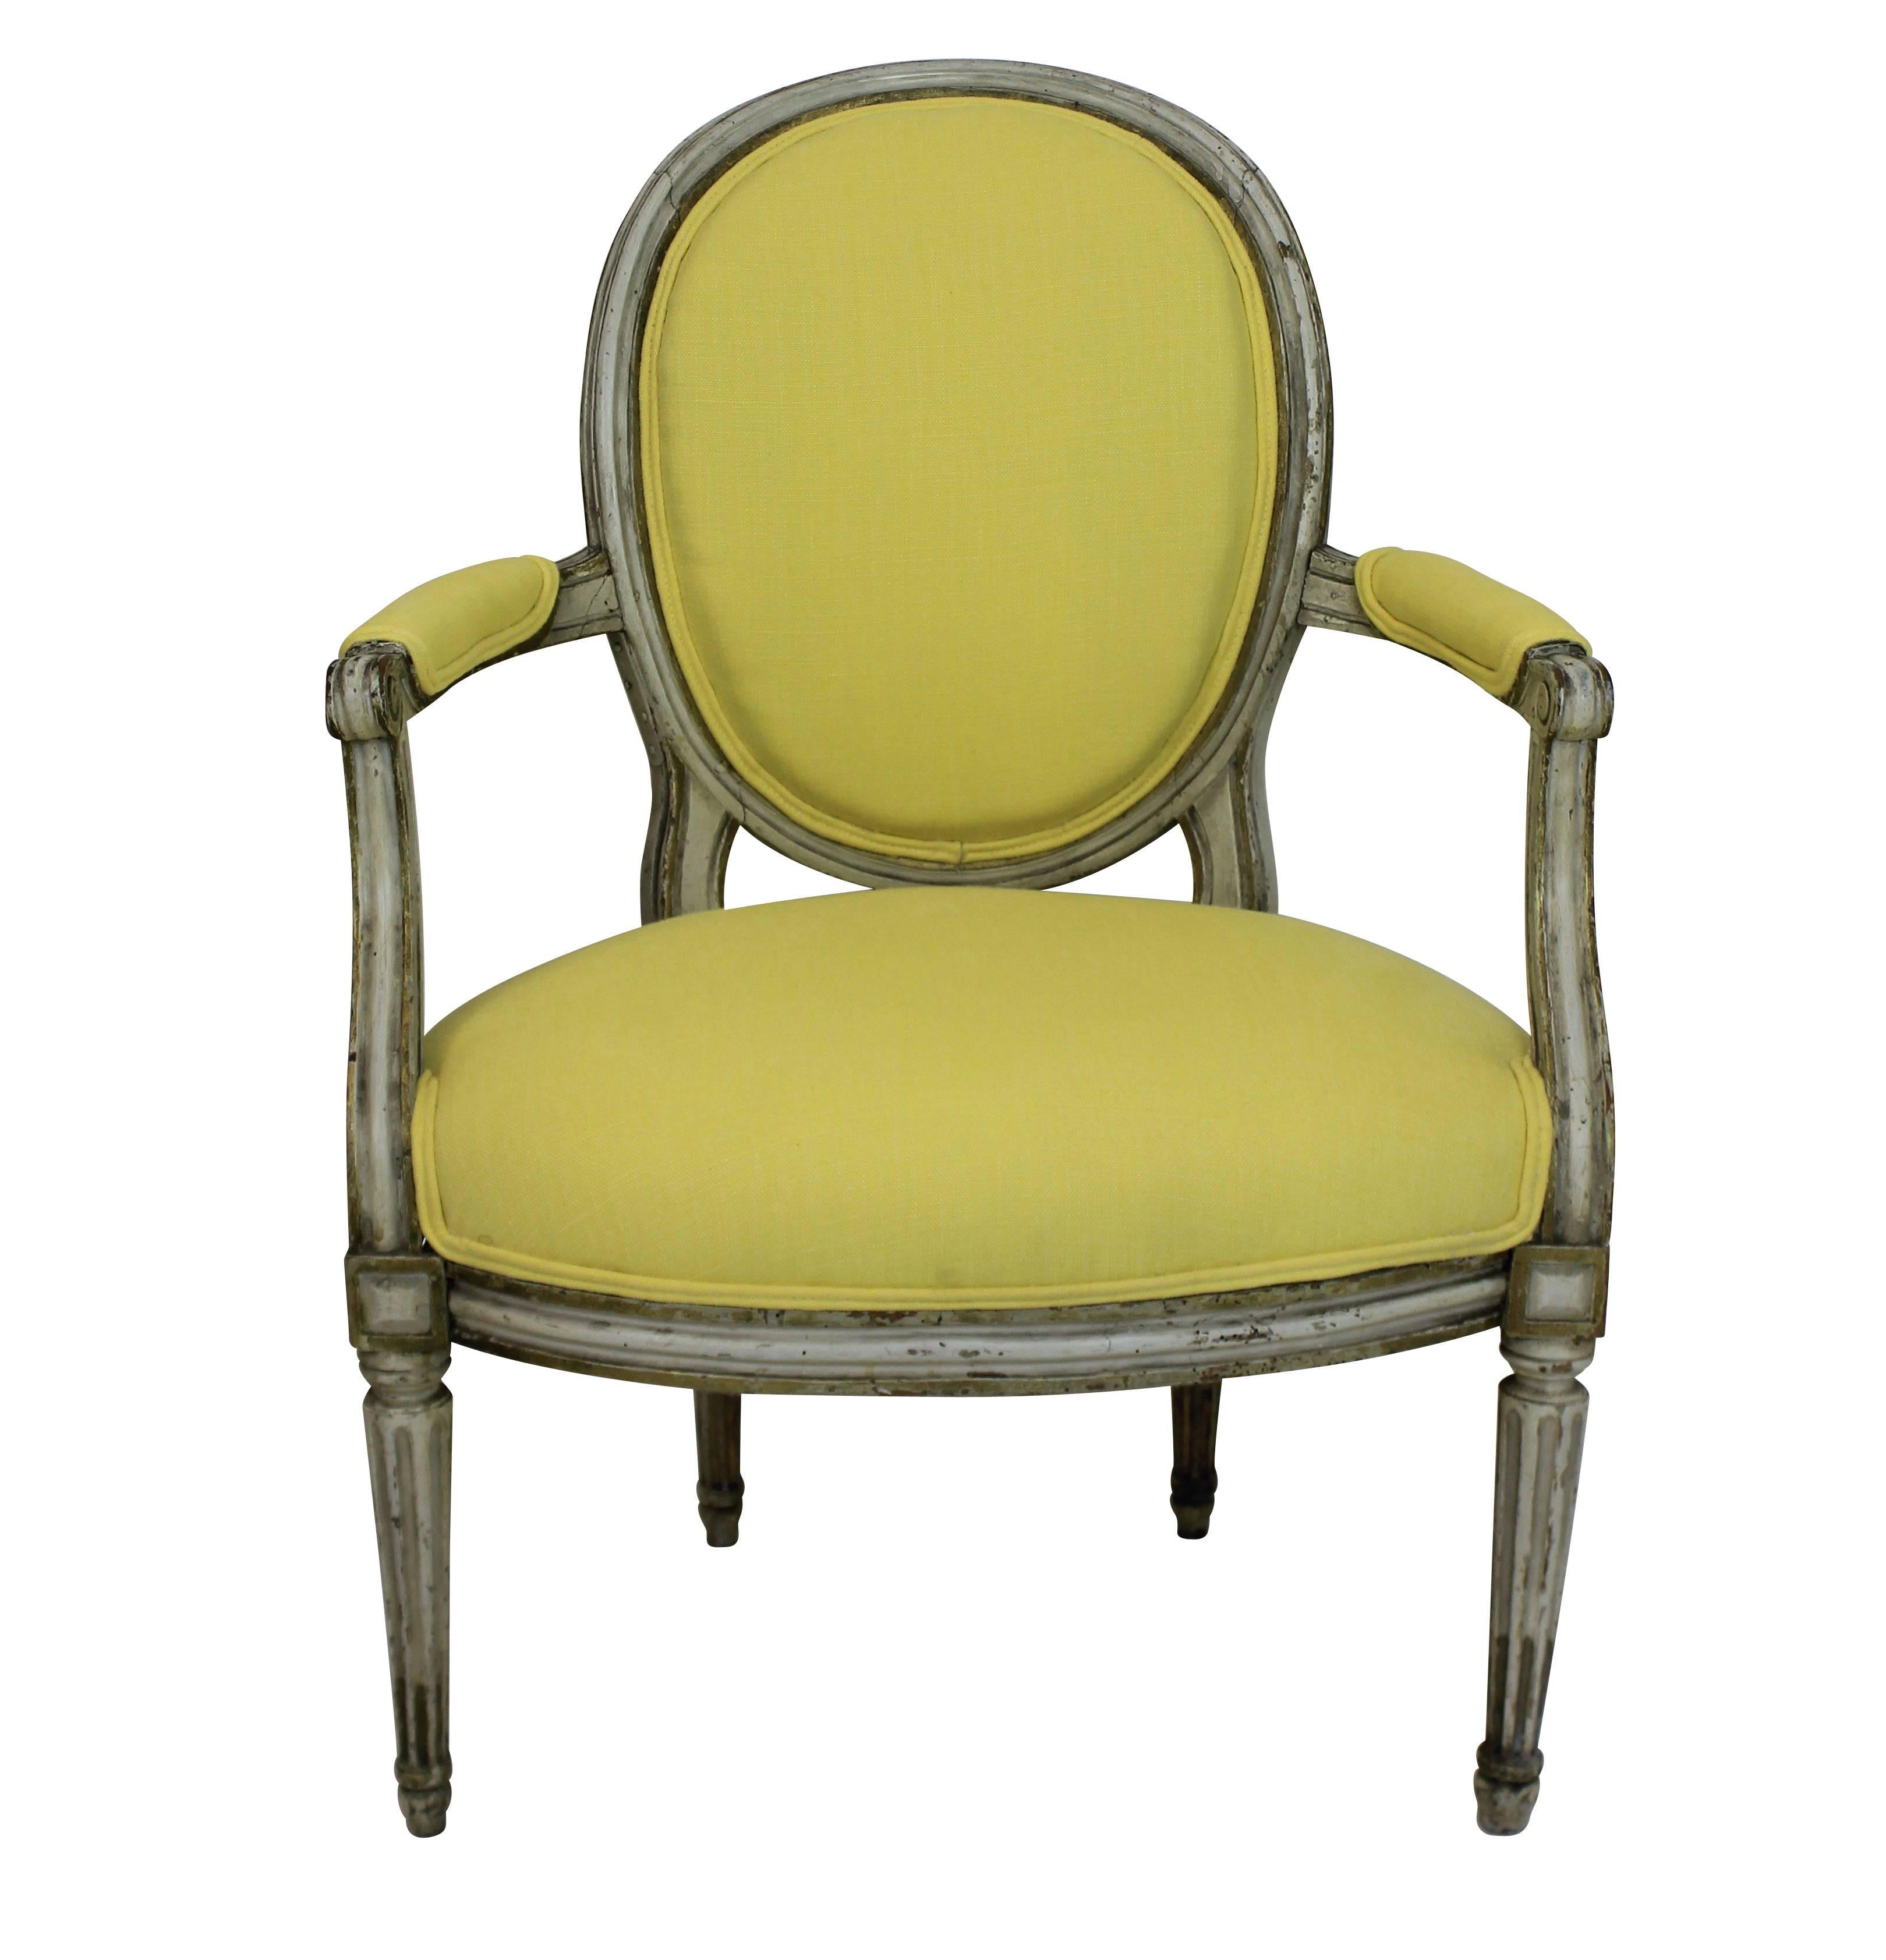 A set of six French 18th century painted armchairs. In their original condition, newly upholstered in Pierre Frey lemon linen.

Please note price is per pair.